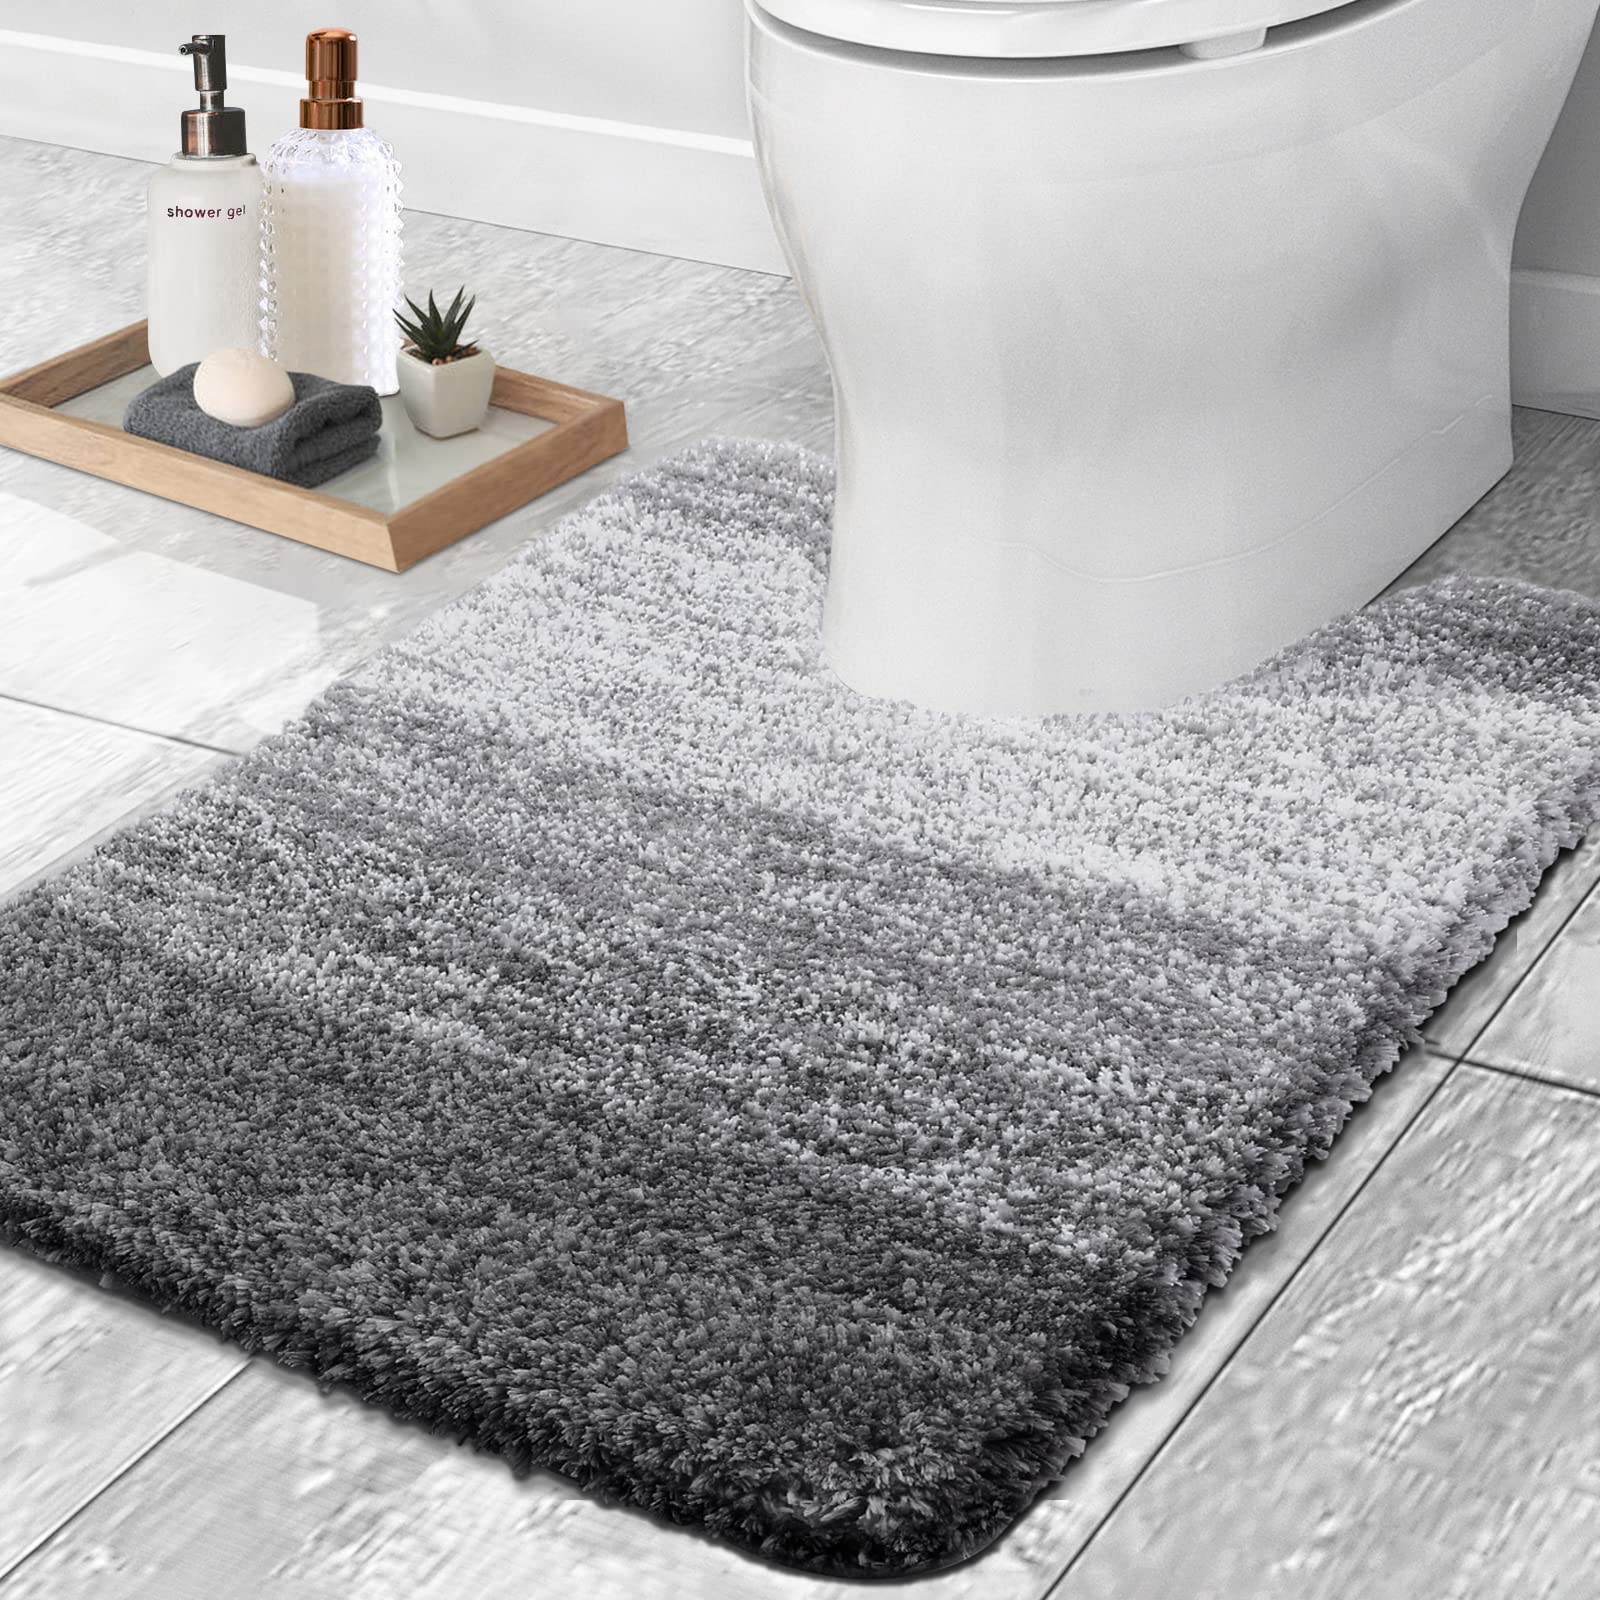 Buganda Luxury U-Shaped Bathroom Rugs, Super Soft and Absorbent Microfiber Toilet Bath Mats, Non-Slip Contour Bathroom Carpets with Rubber Backing, 20X24, Grey - image 1 of 7